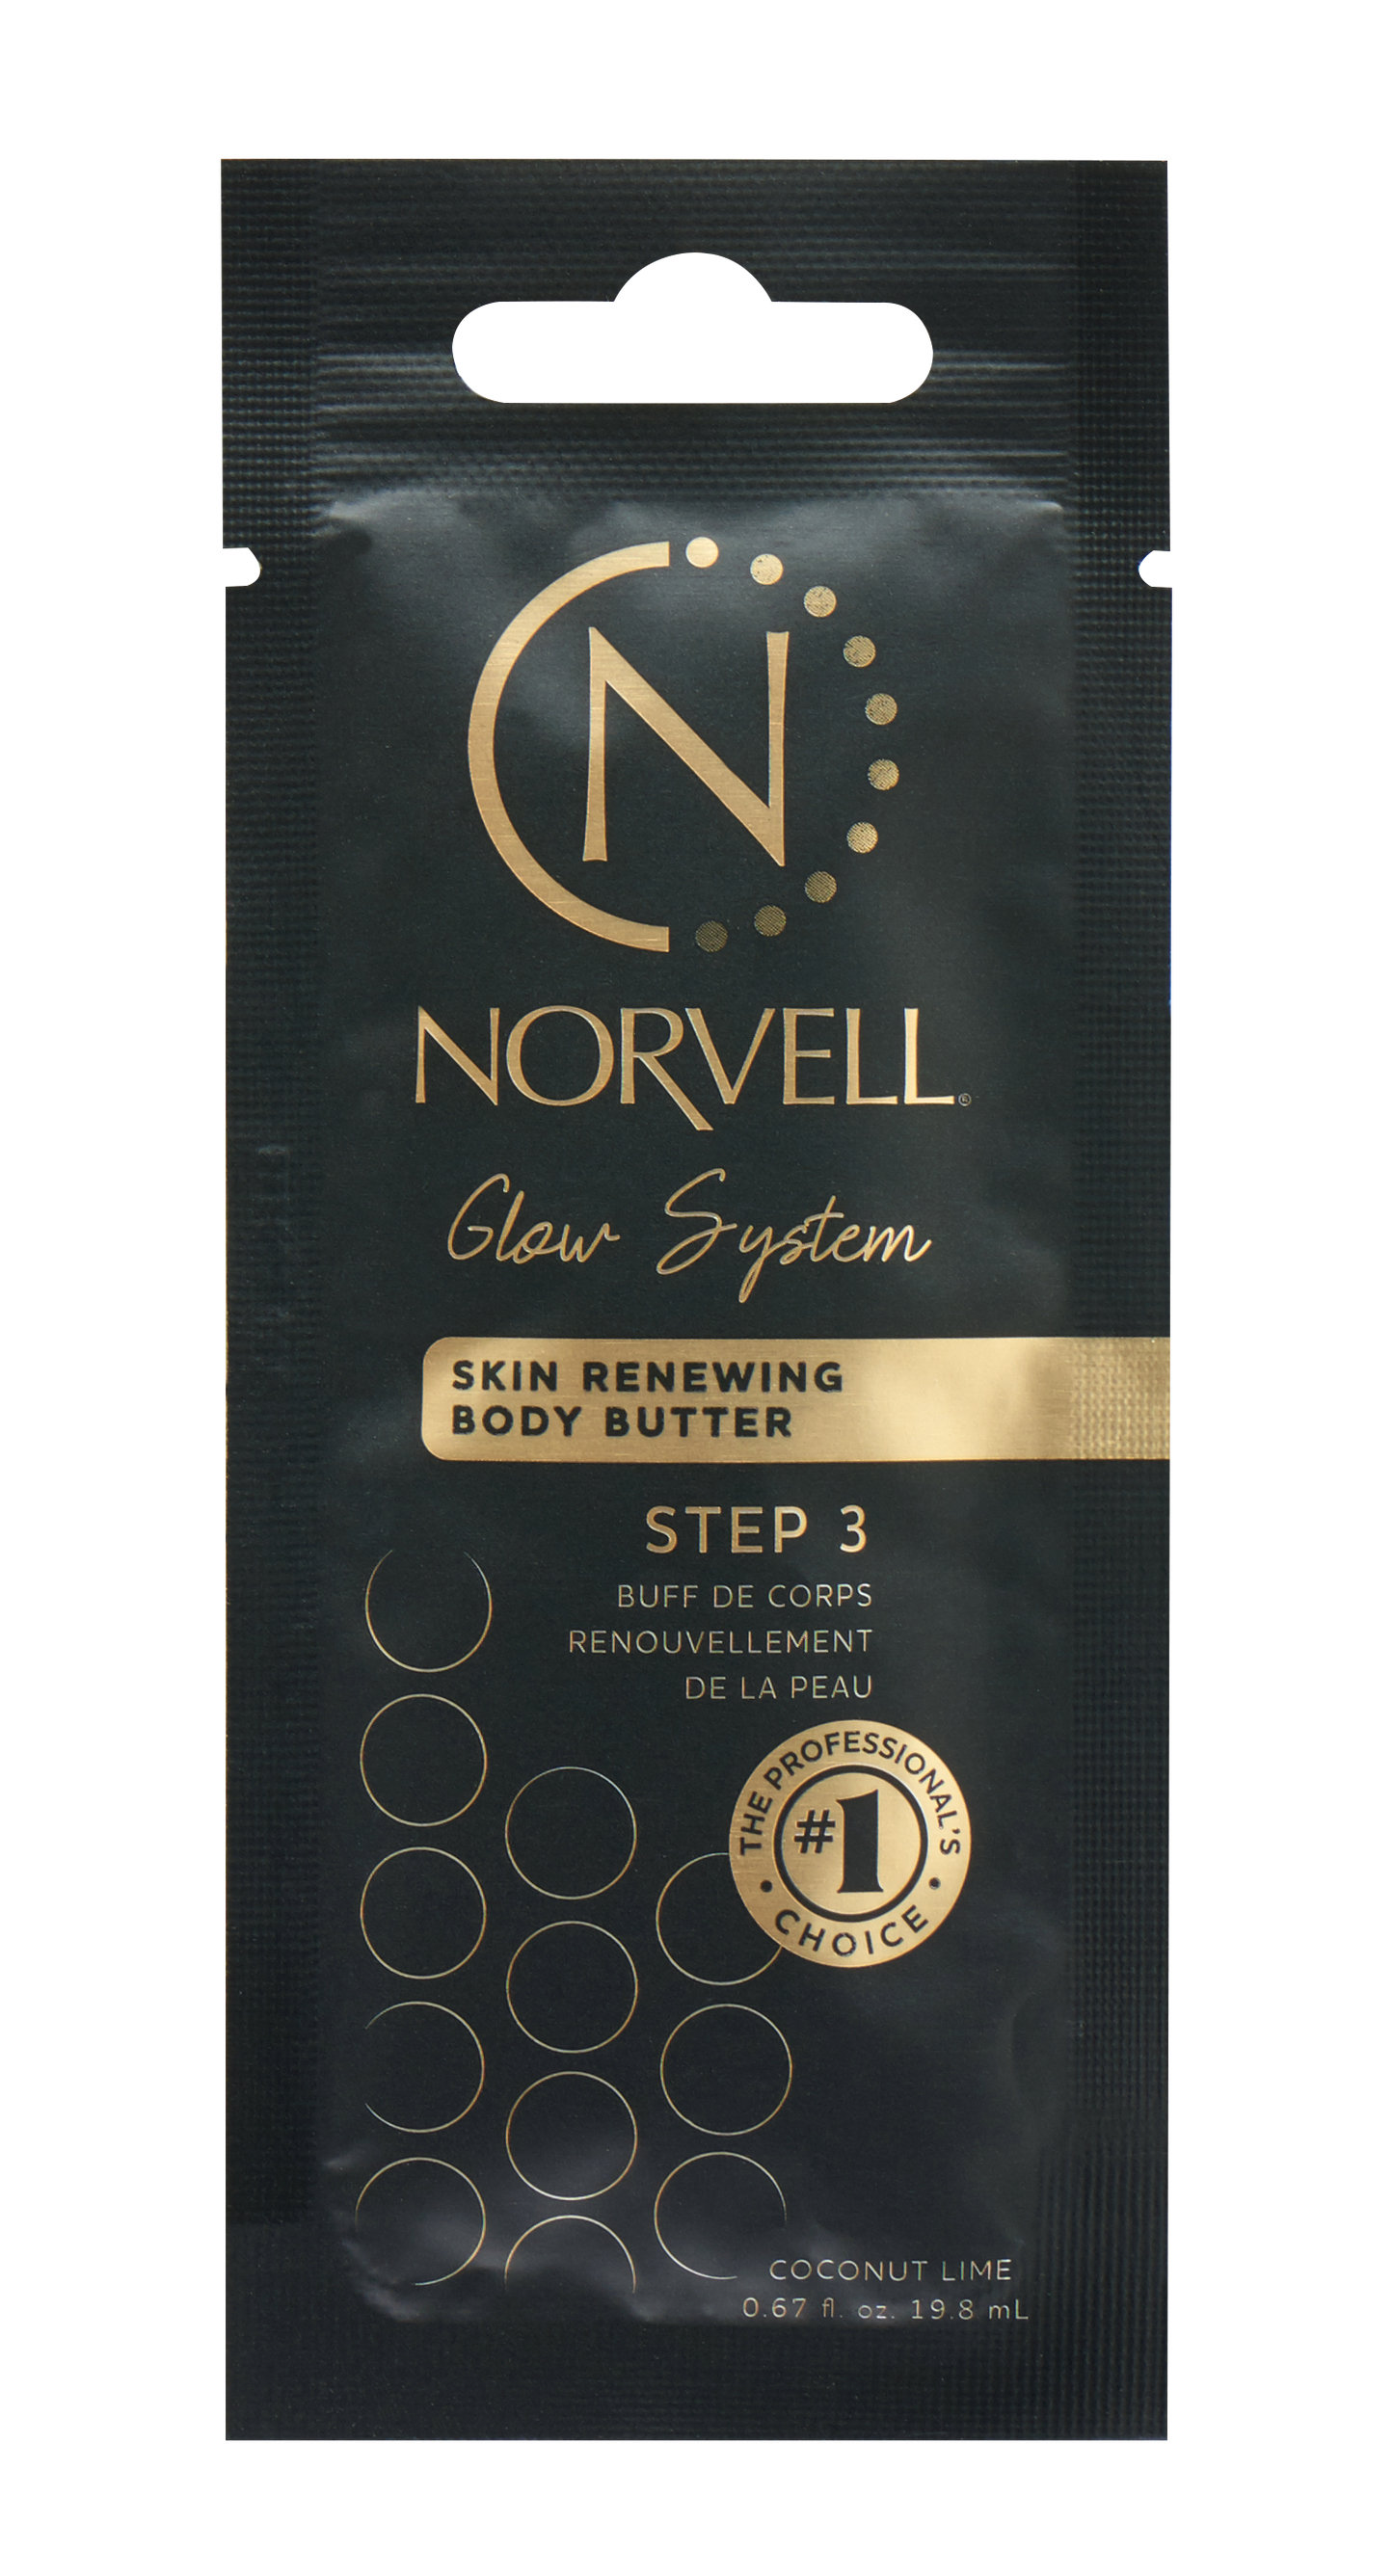 Norvell Glow System Post-Tan Body Butter